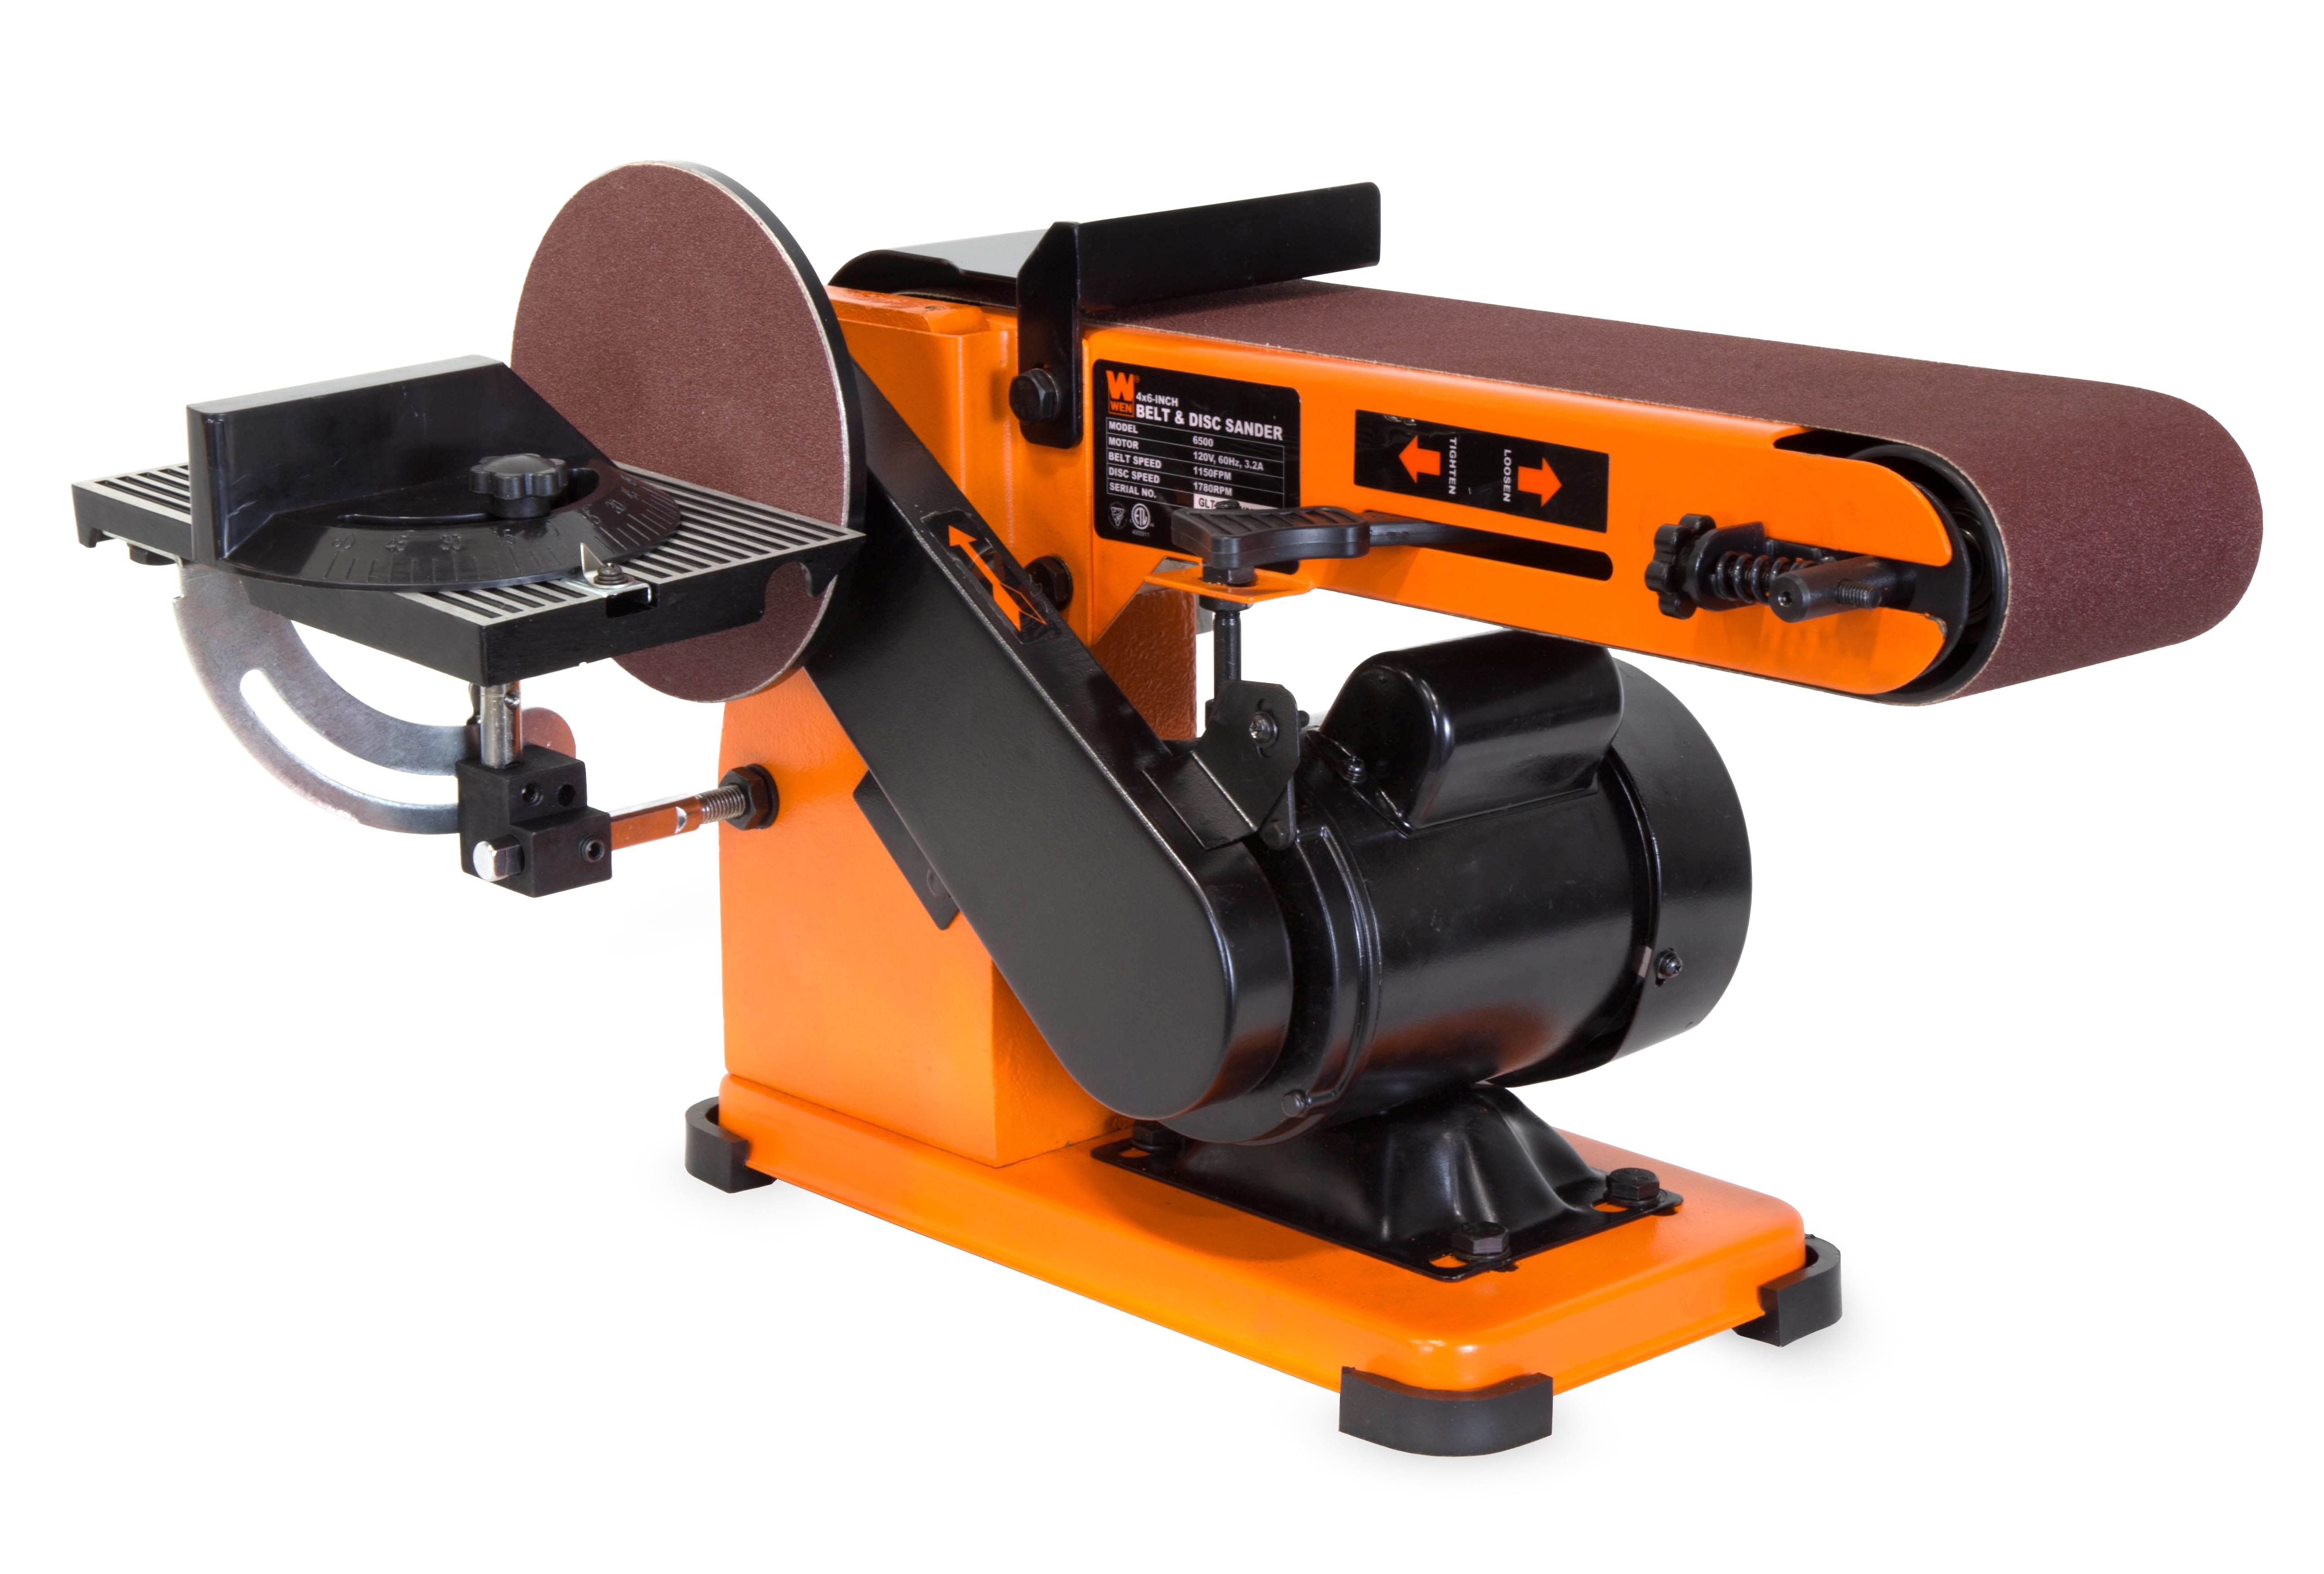 6500T WEN 3.2-Amp 4 x 36-Inch Belt and 6-Inch Disc Sander with Steel Base 